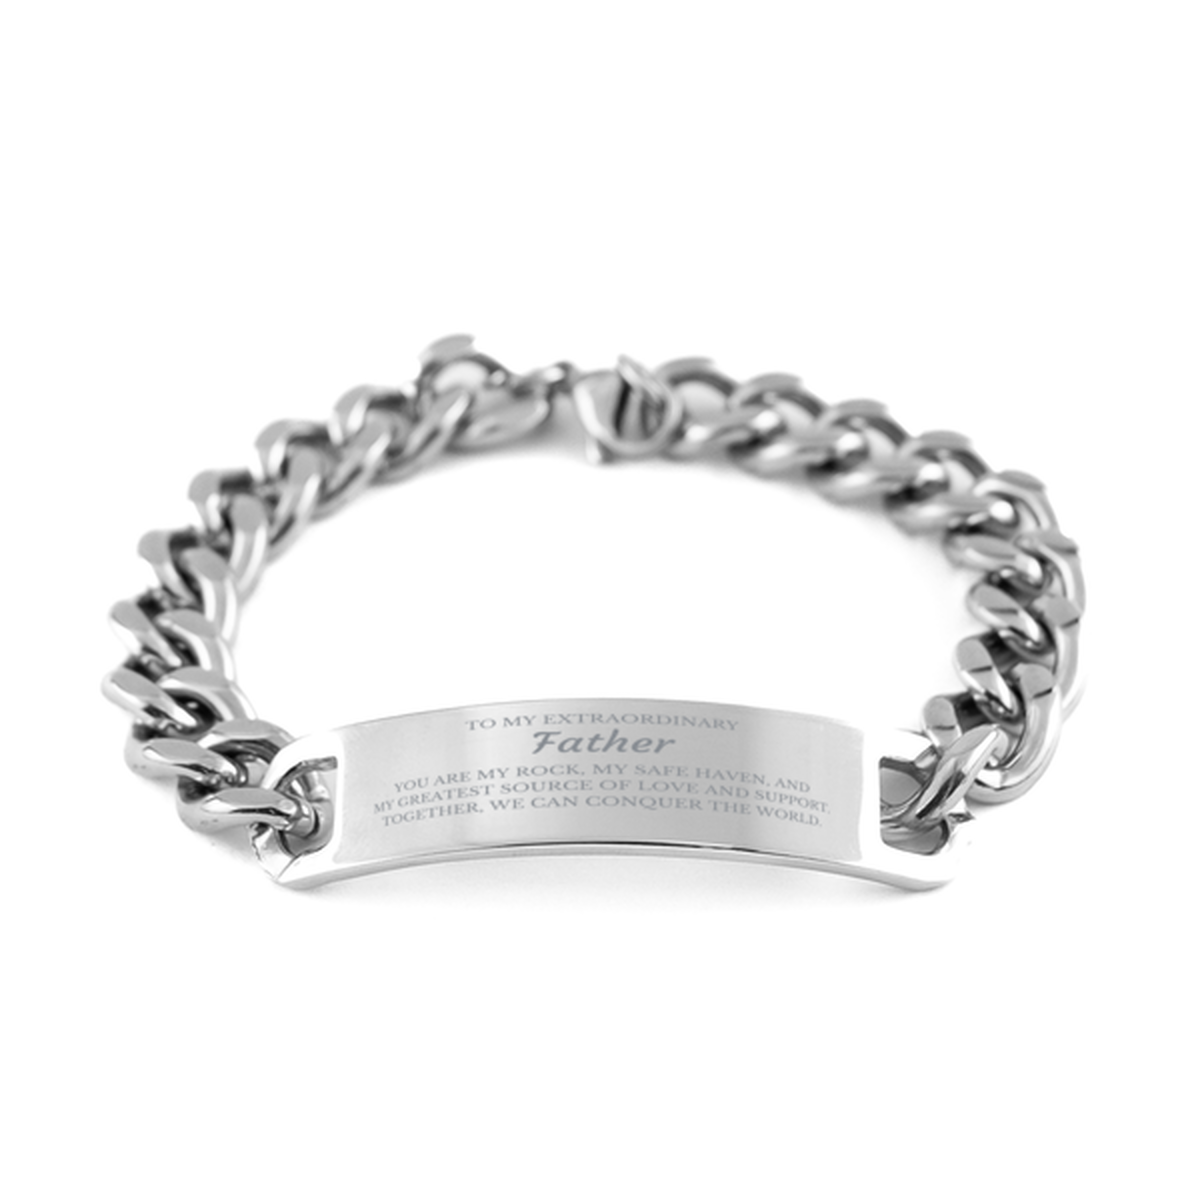 To My Extraordinary Father Gifts, Together, we can conquer the world, Birthday Cuban Chain Stainless Steel Bracelet For Father, Christmas Gifts For Father